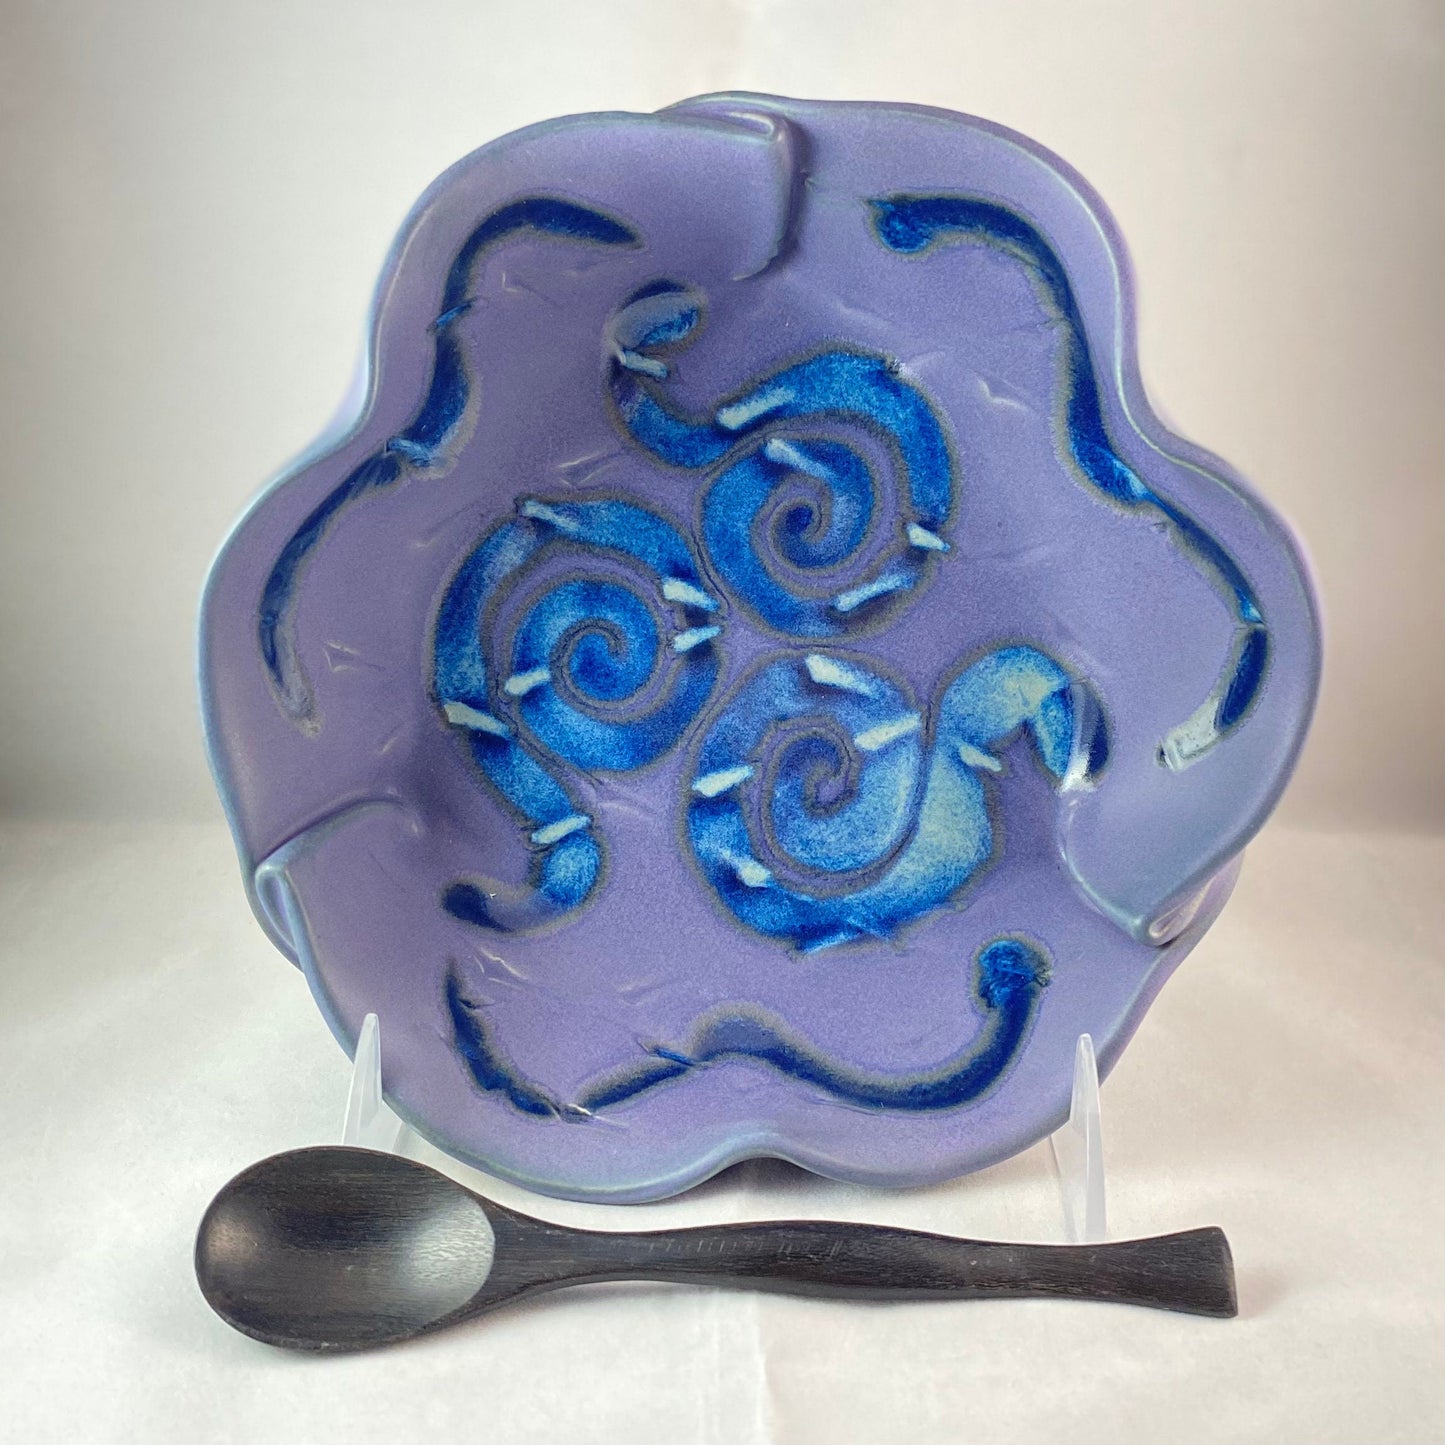 Handmade Purple and Blue Brie Dish with Spoon, Functional and Decorative Pottery